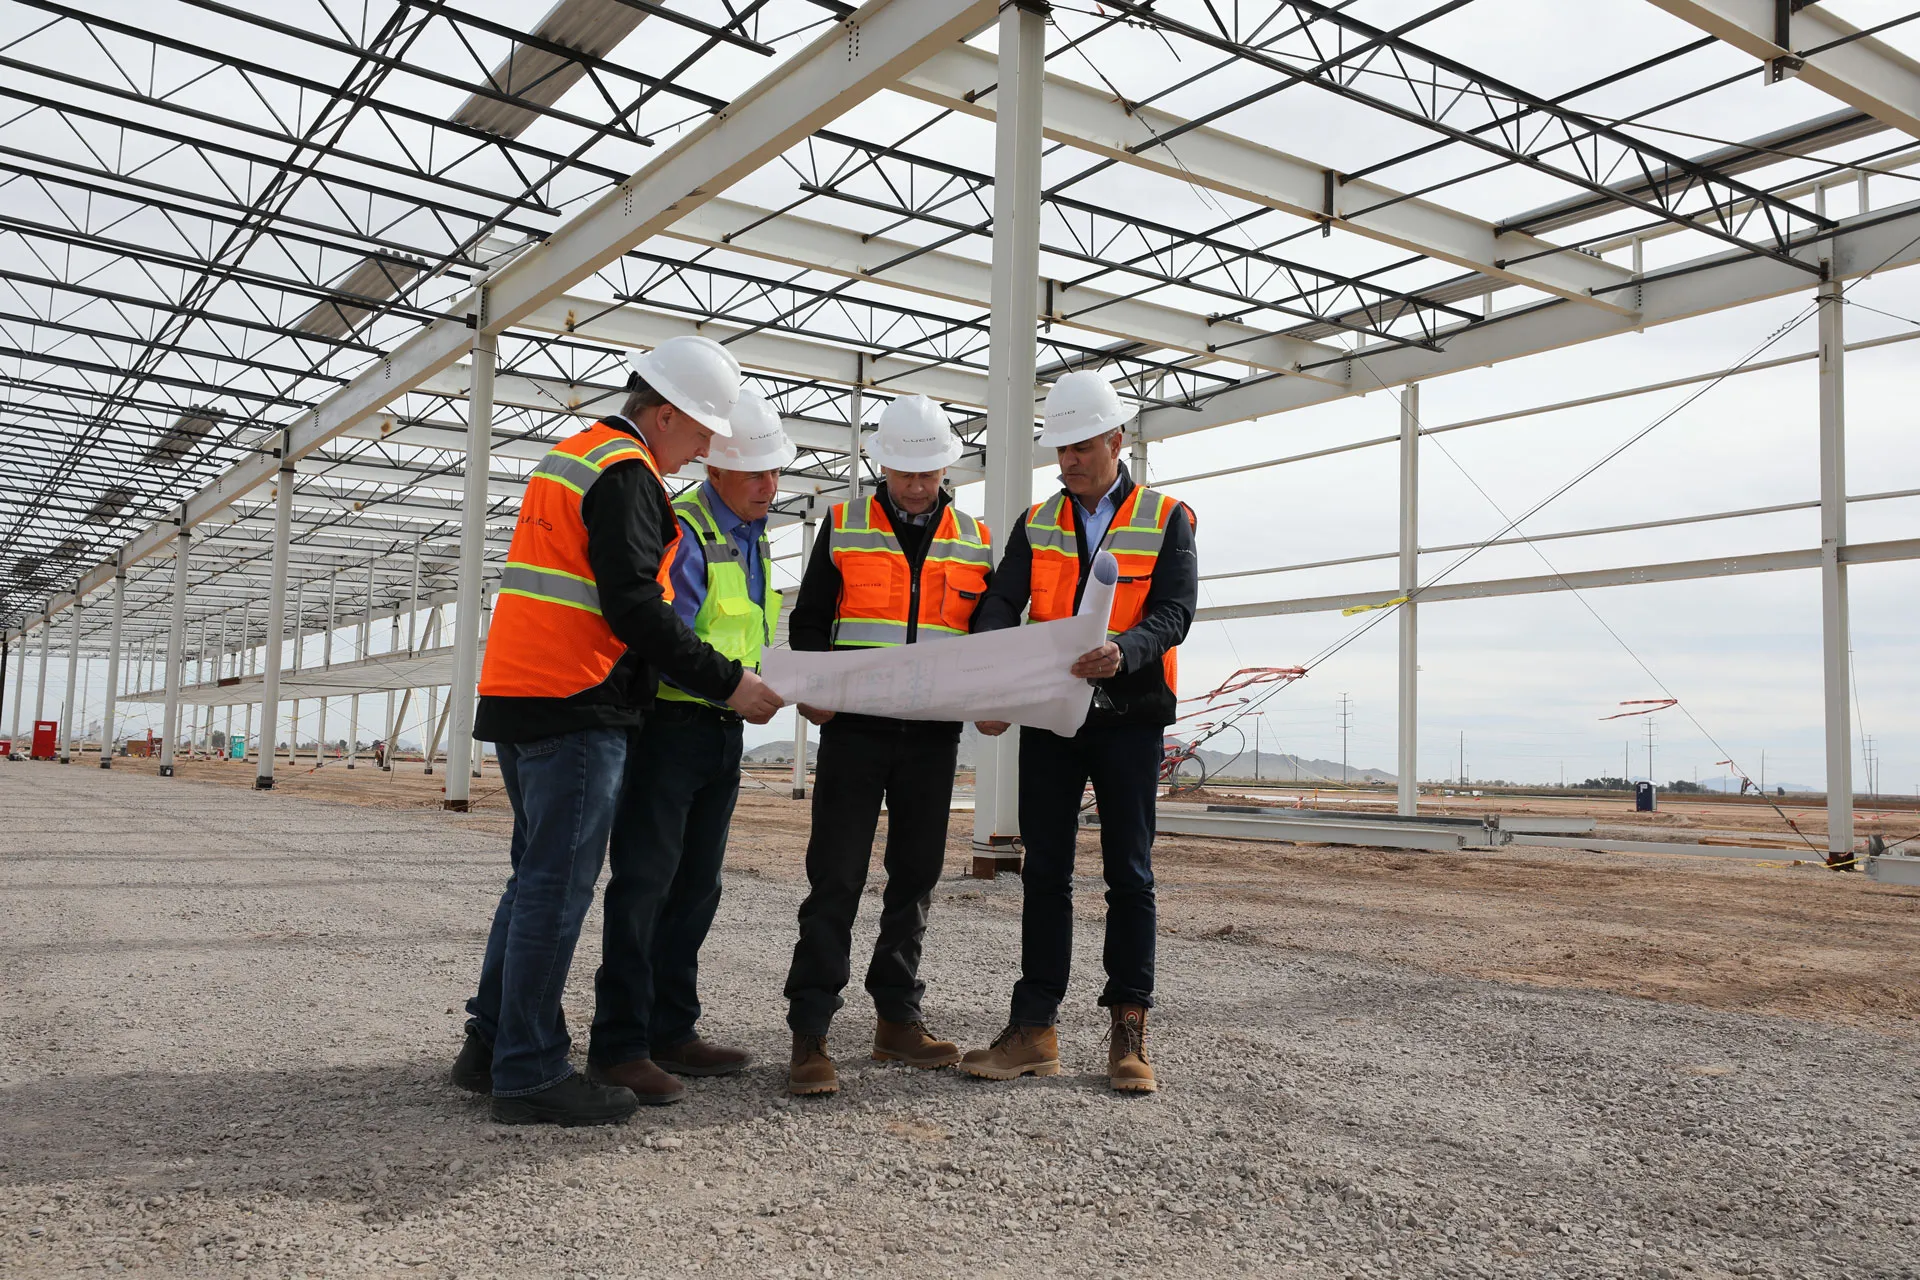 CEO Peter Rawlinson Tours Our Future Factory in Arizona